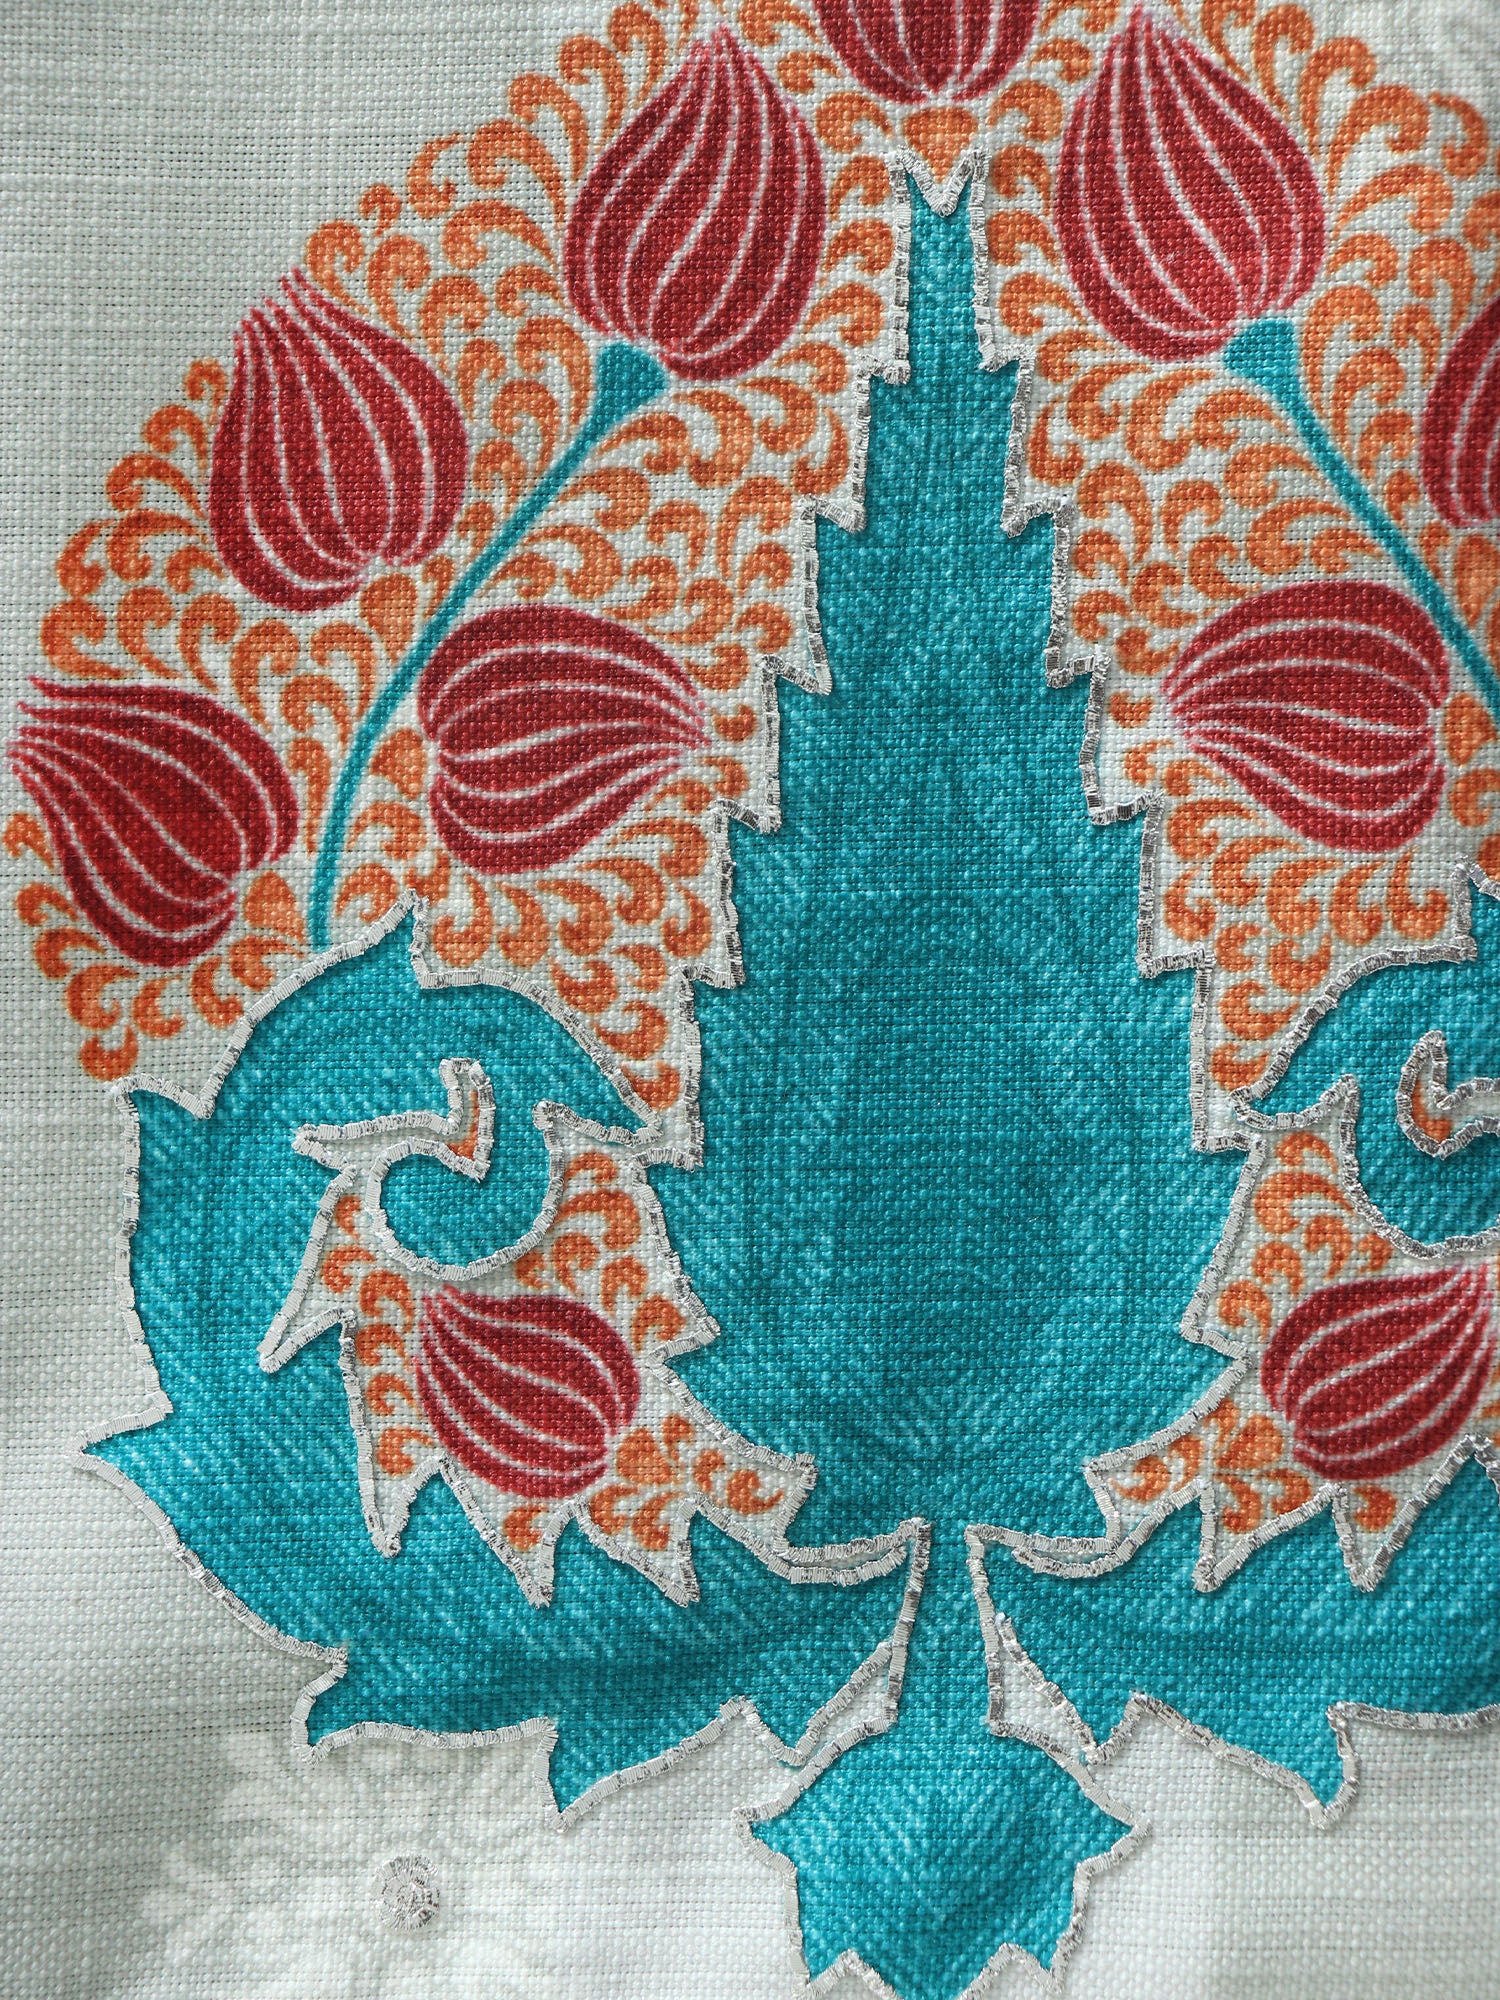 closeup of hand embroidery on digitally printed floral pattern of table runner - 12x84 inch